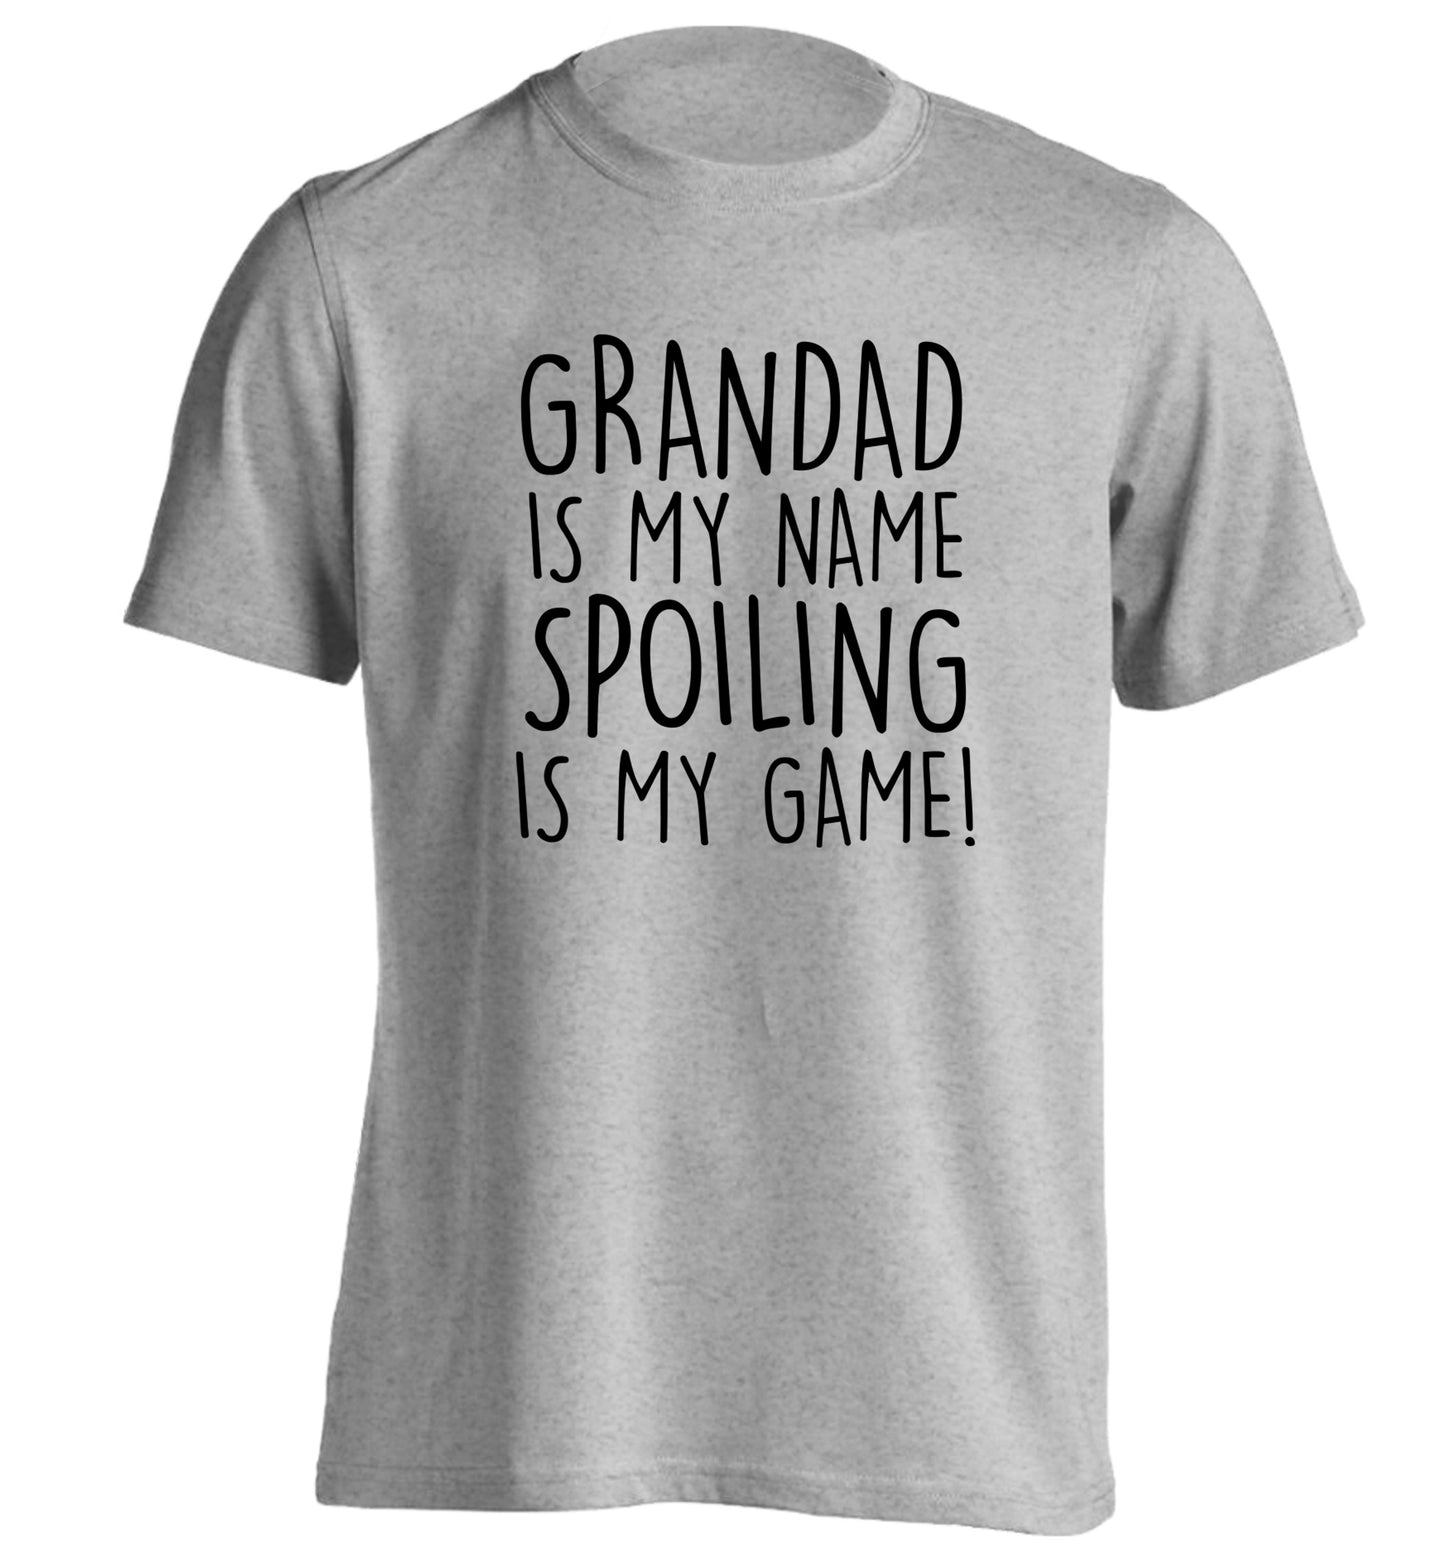 Grandad is my name, spoiling is my game adults unisex grey Tshirt 2XL